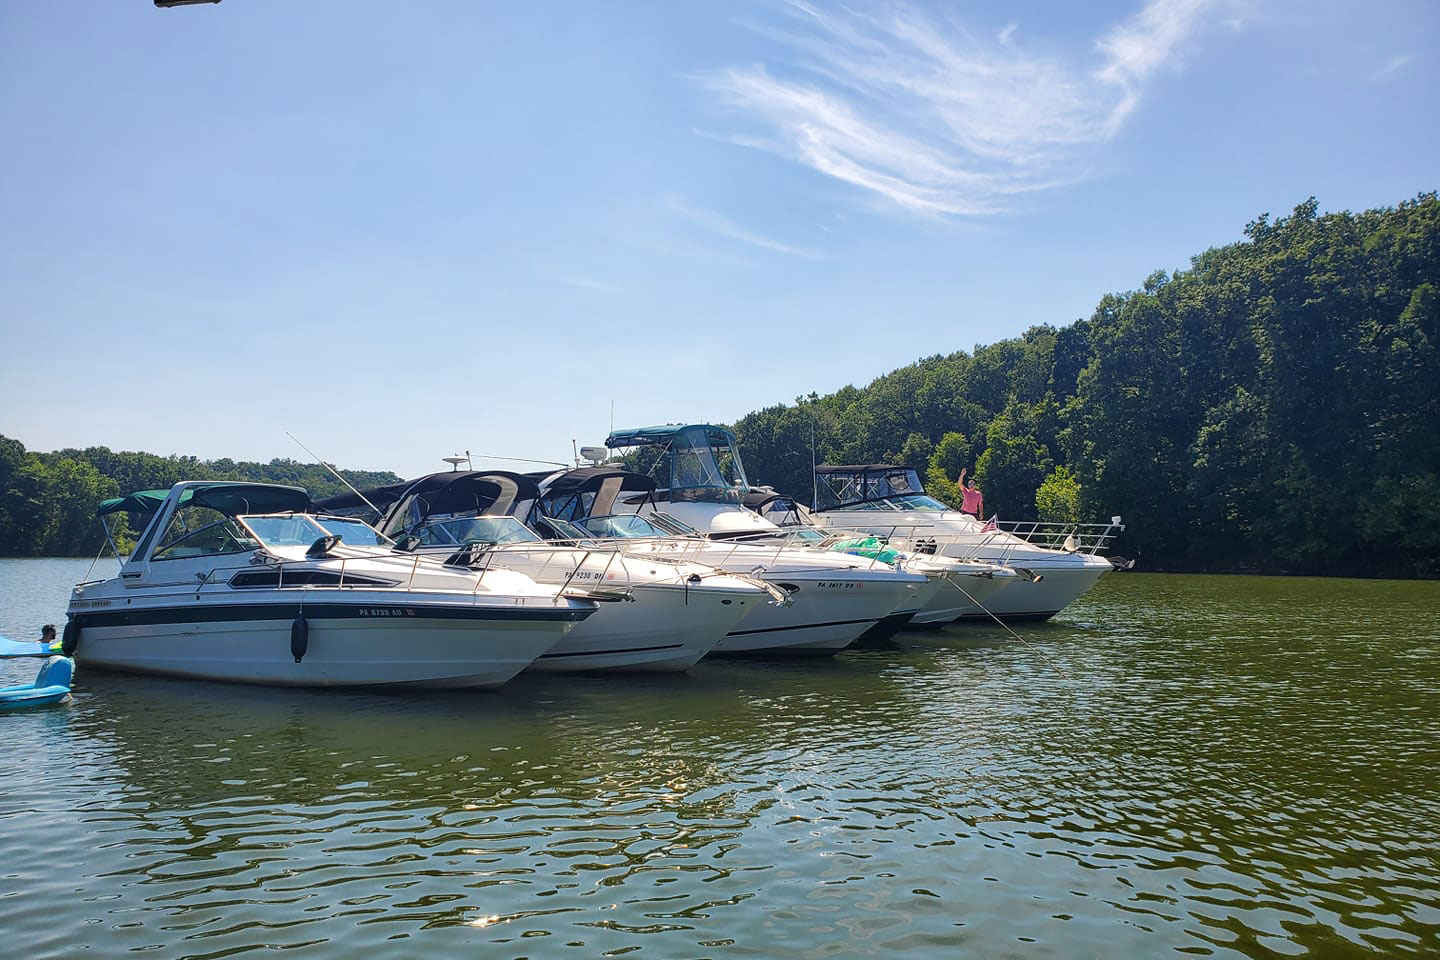 Hitch-up to 6 Speed Boating Lakes in PA